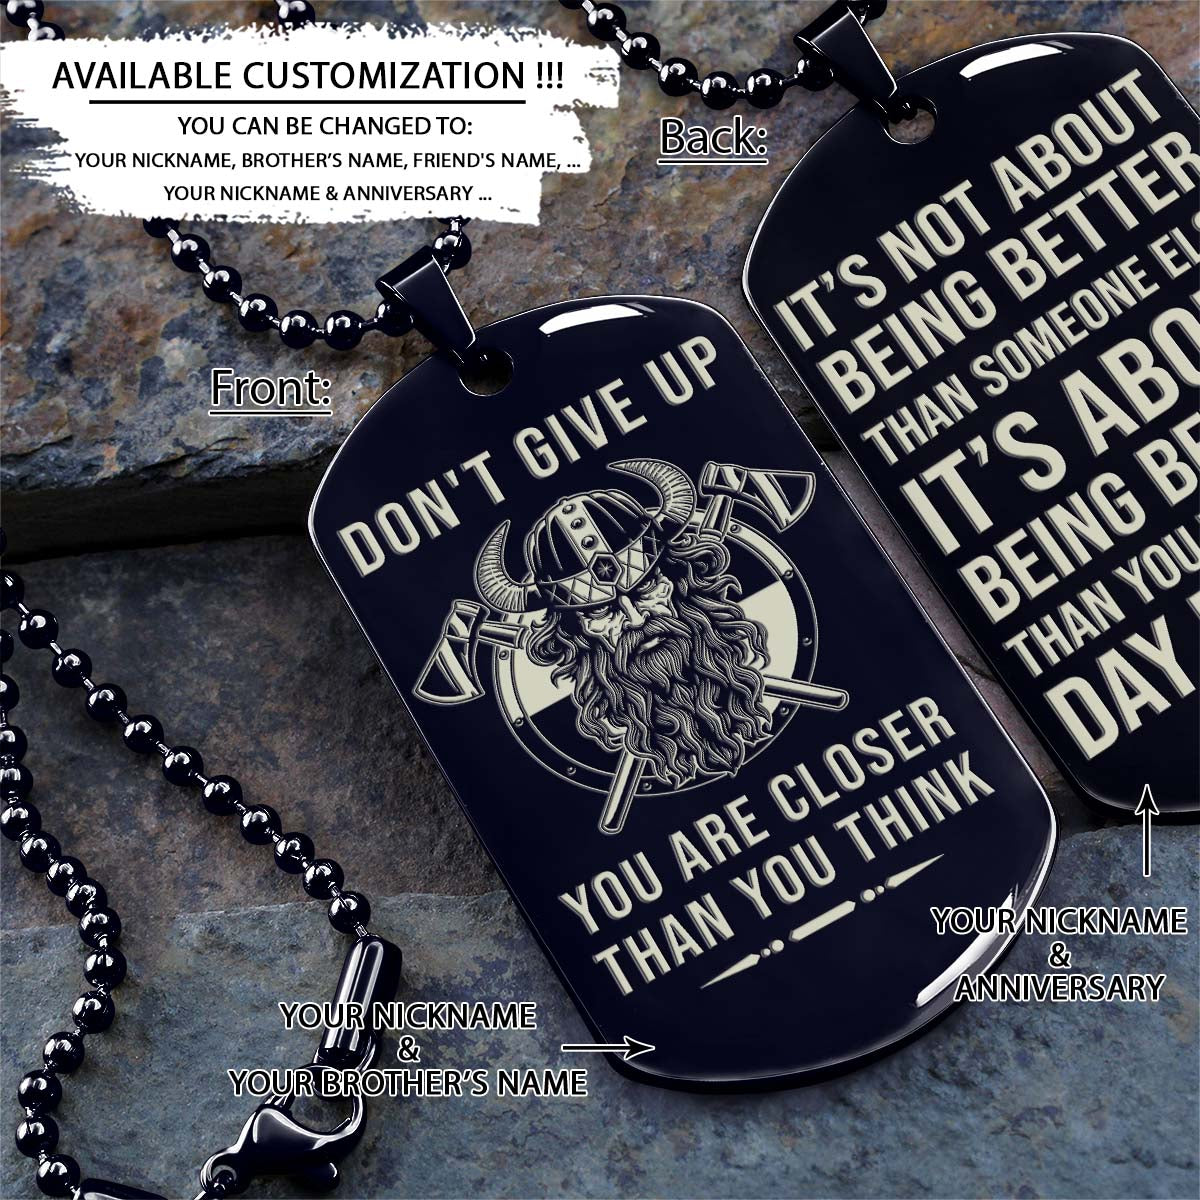 VKD029 - Don't Give Up - It's About Being Better Than You Were The Day Before - Odin - Vikings - Double Sided Engrave Black Dog Tag